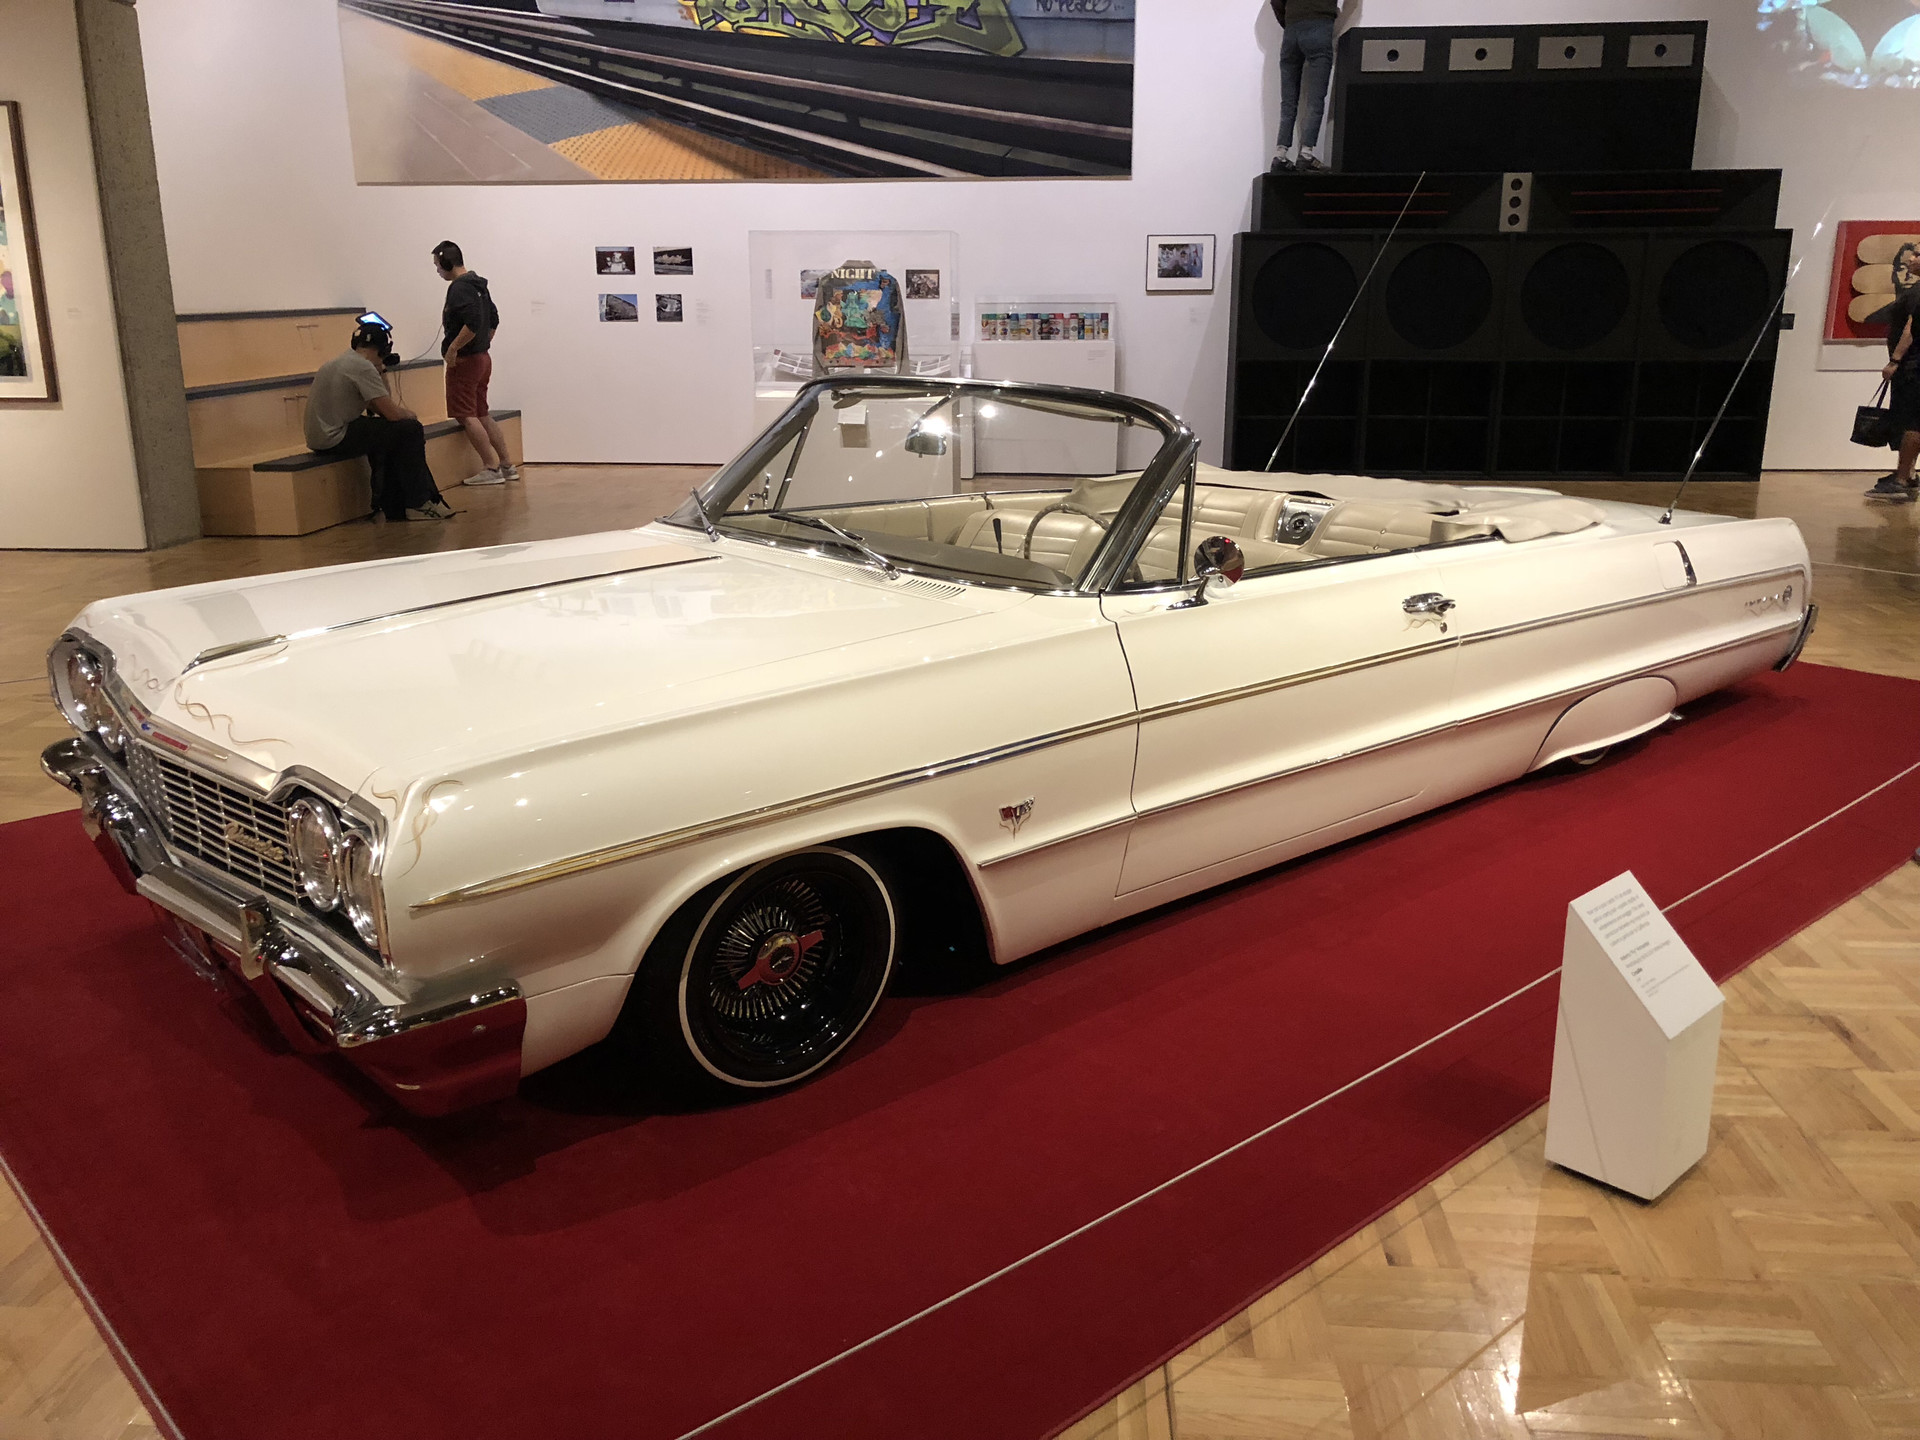 A 1964 Chevy Impala Lowrider at the "Respece: Hip-Hop Style & Wisdom" exhibit at the Oakland Museum of California exhibit. Car culture is a big part of hip-hop history and culture.